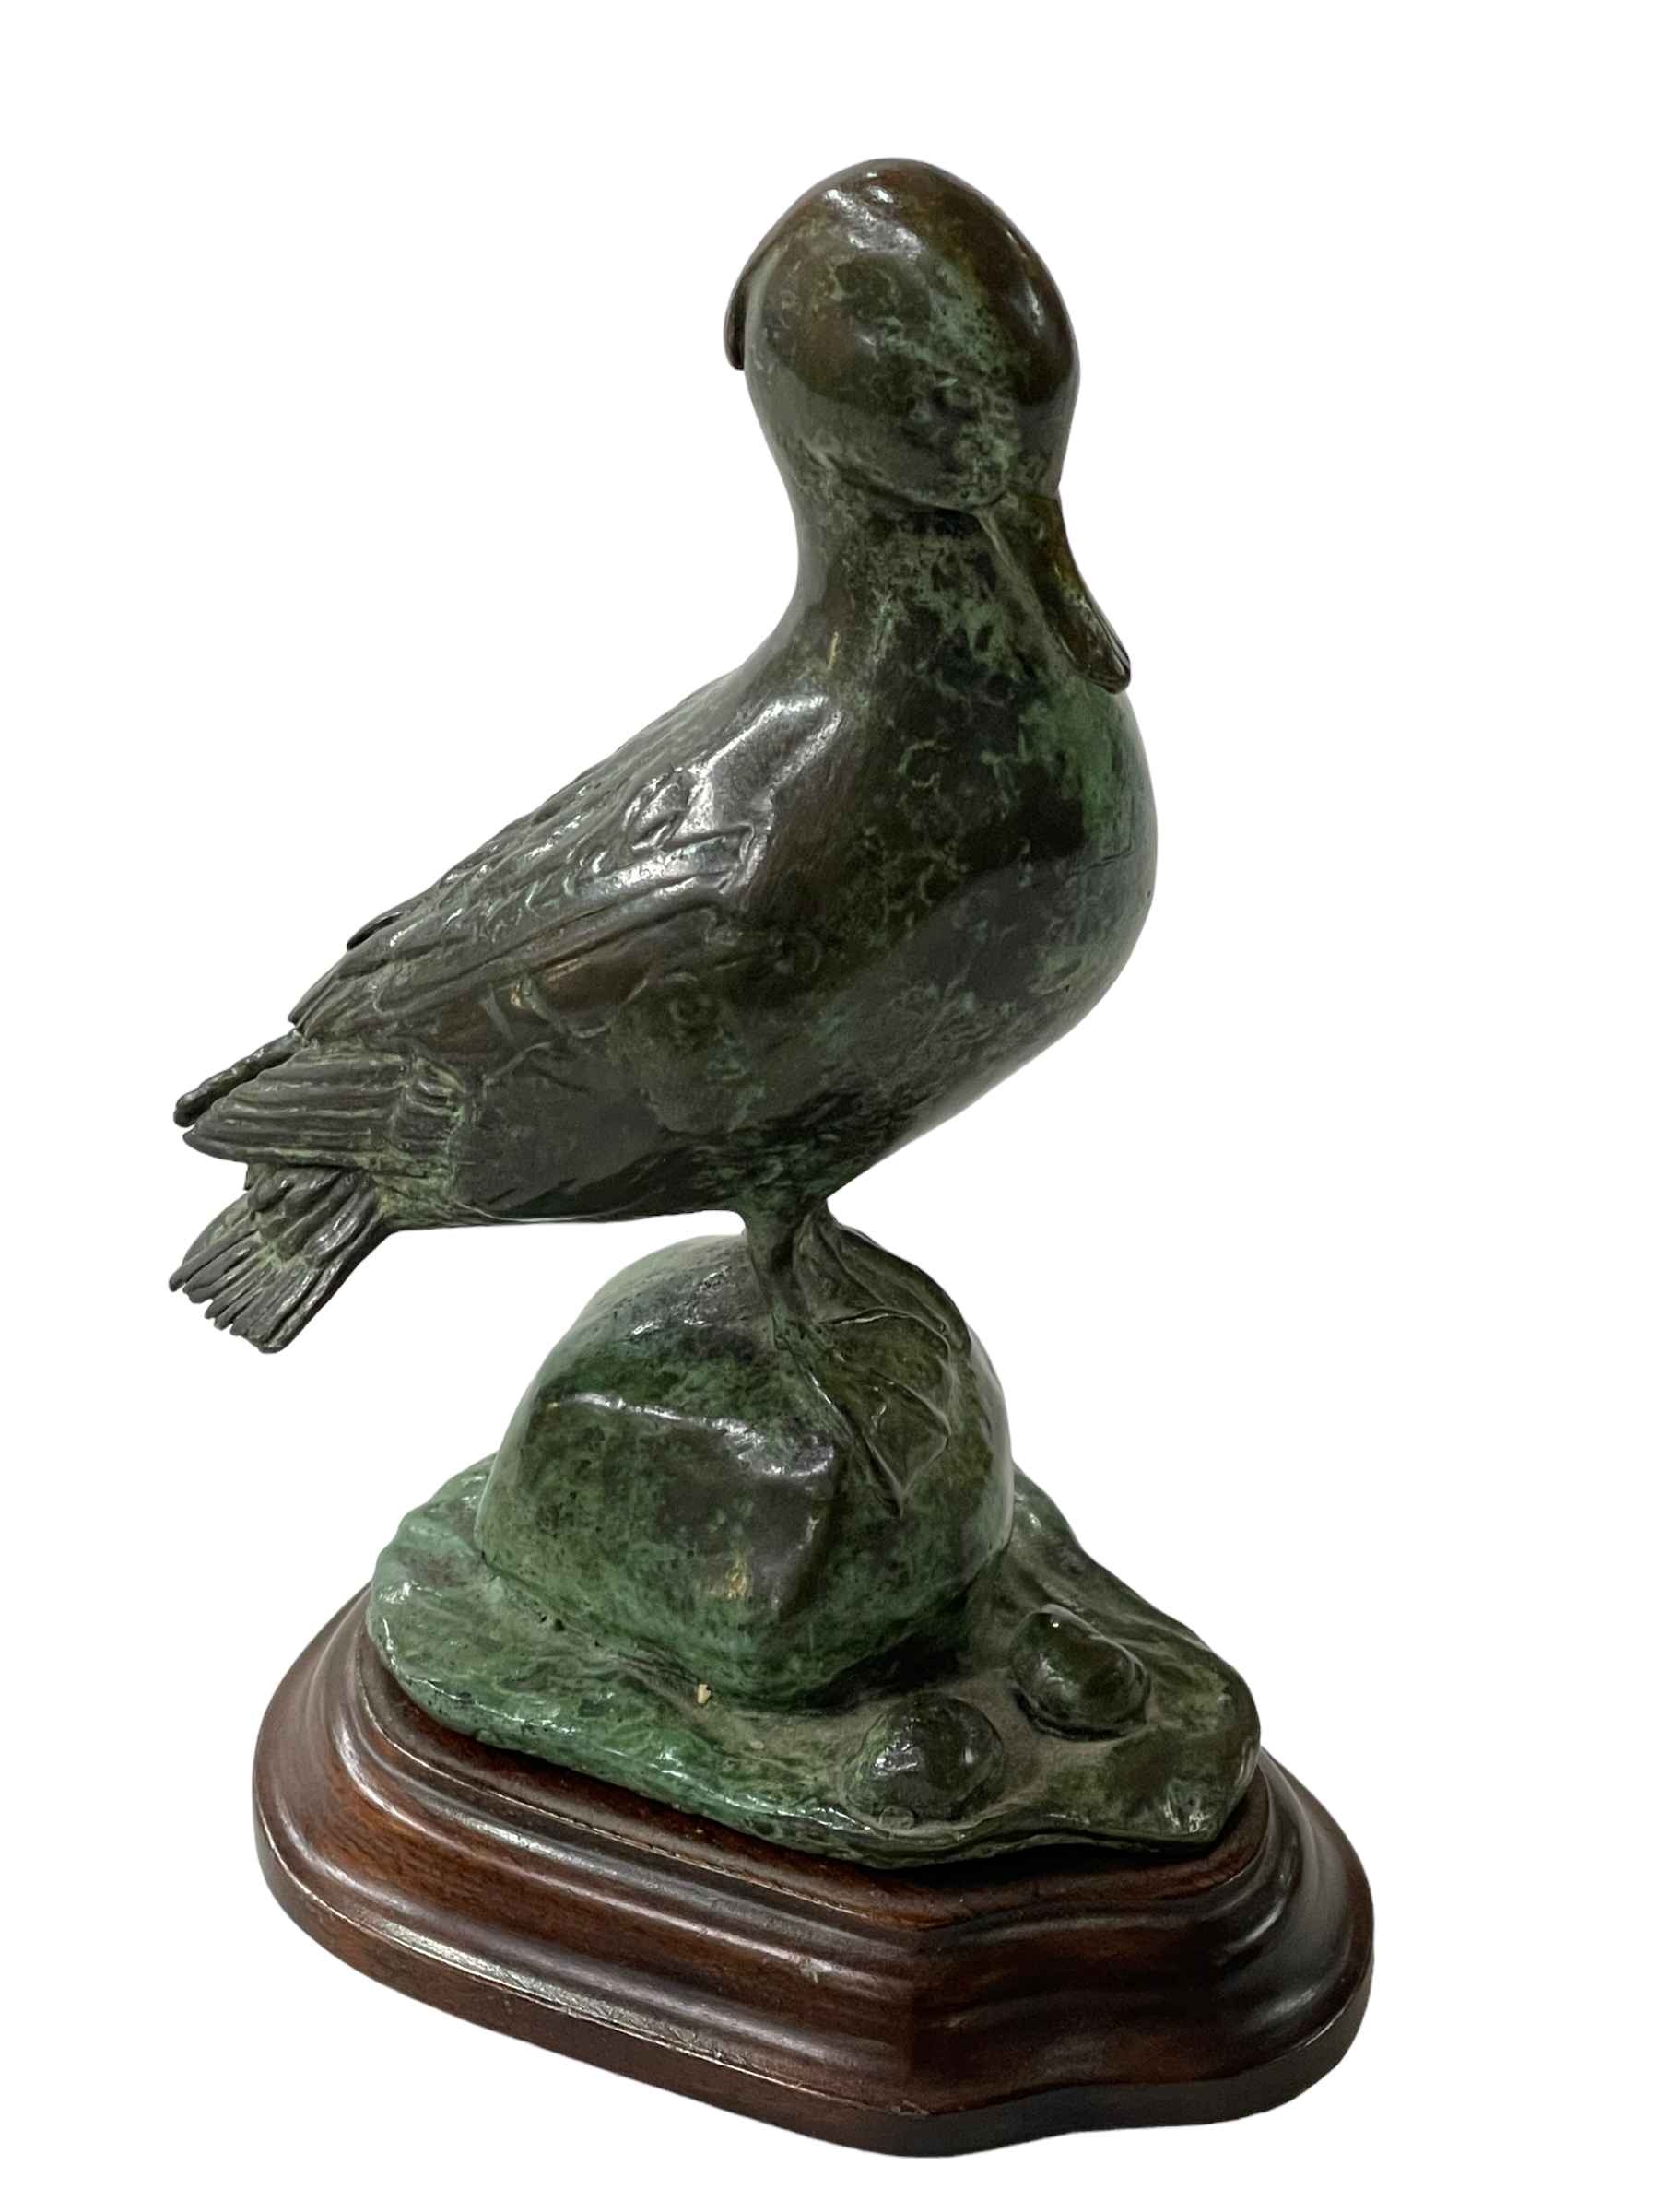 Green patinated bronze model of a duck on wooden stand, 13cm high.